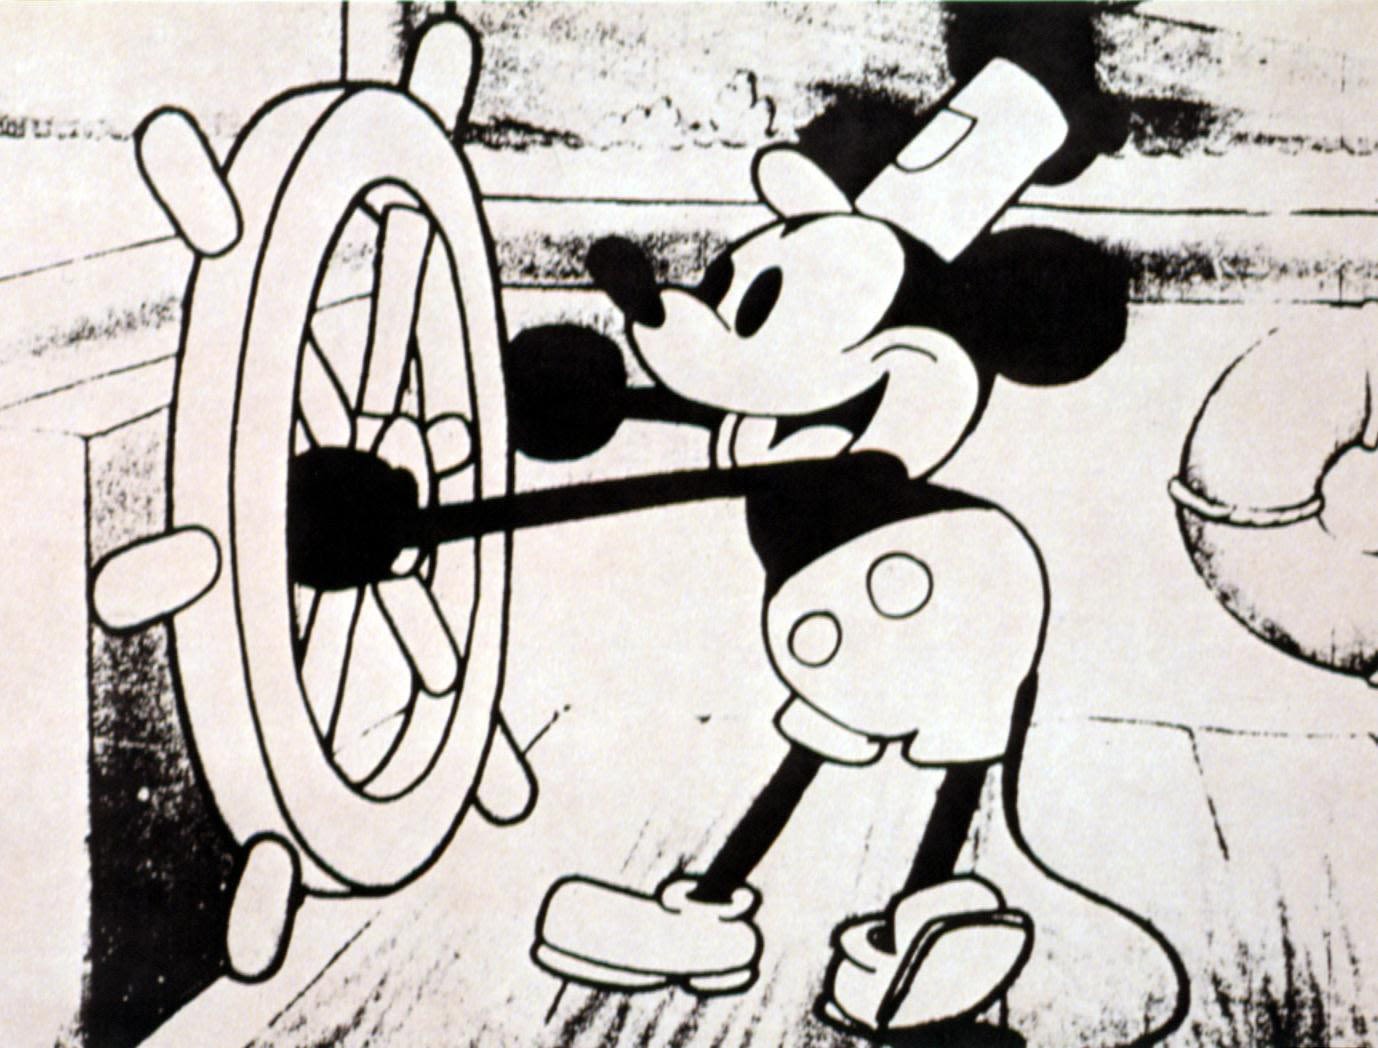 Steamboat Willie': An early version of Mickey Mouse is now in the public domain | CNN Business